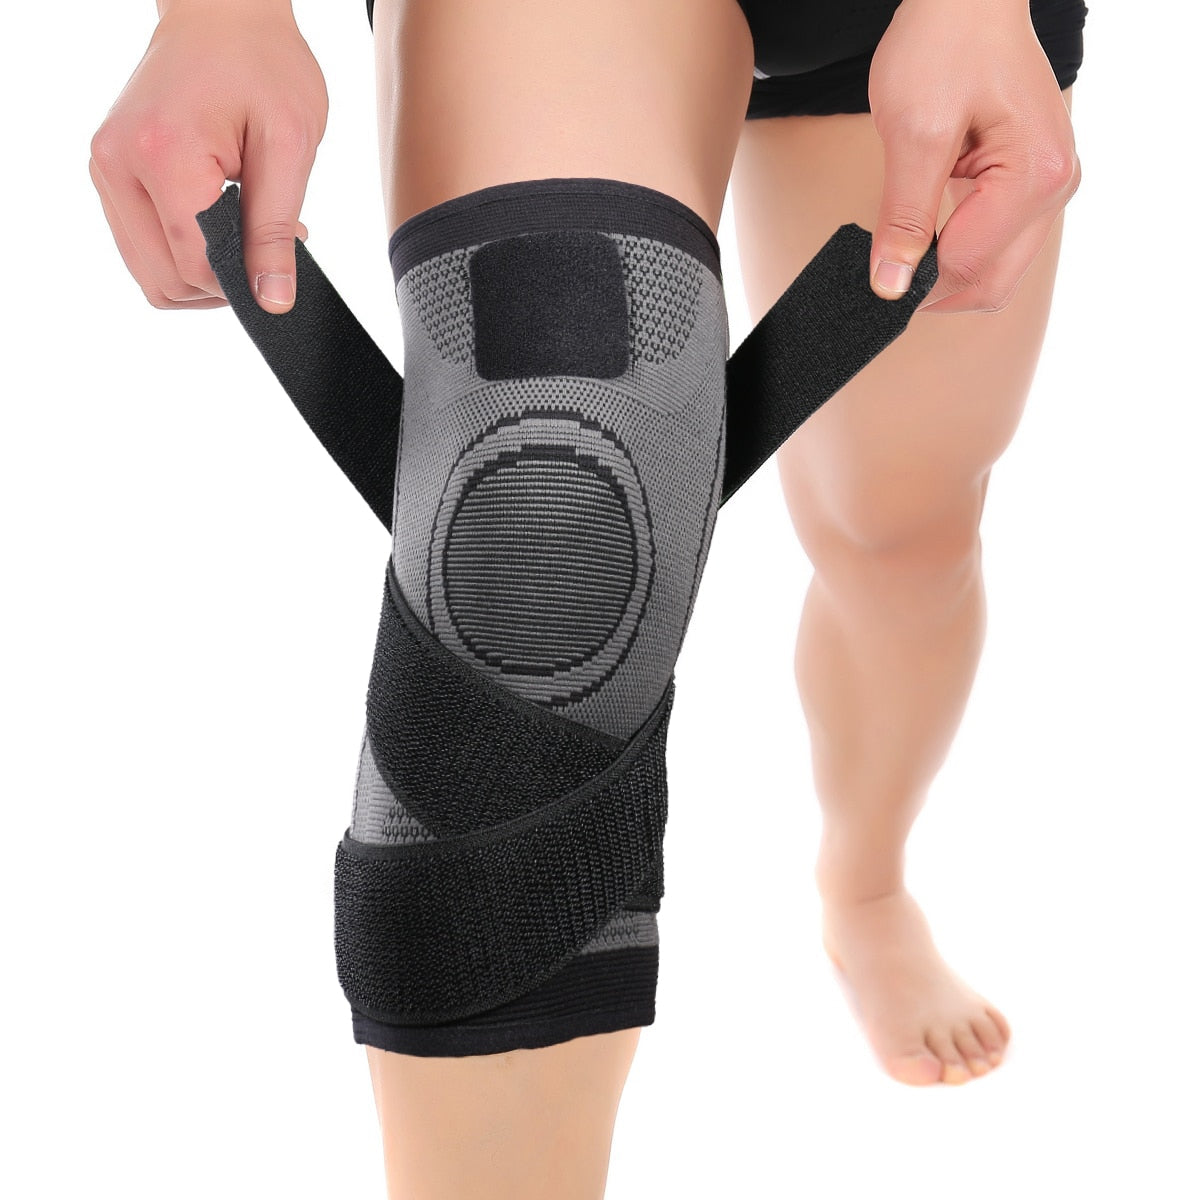 Compression Full Leg Sleeves, Knee Sleeves With Elastic Straps For